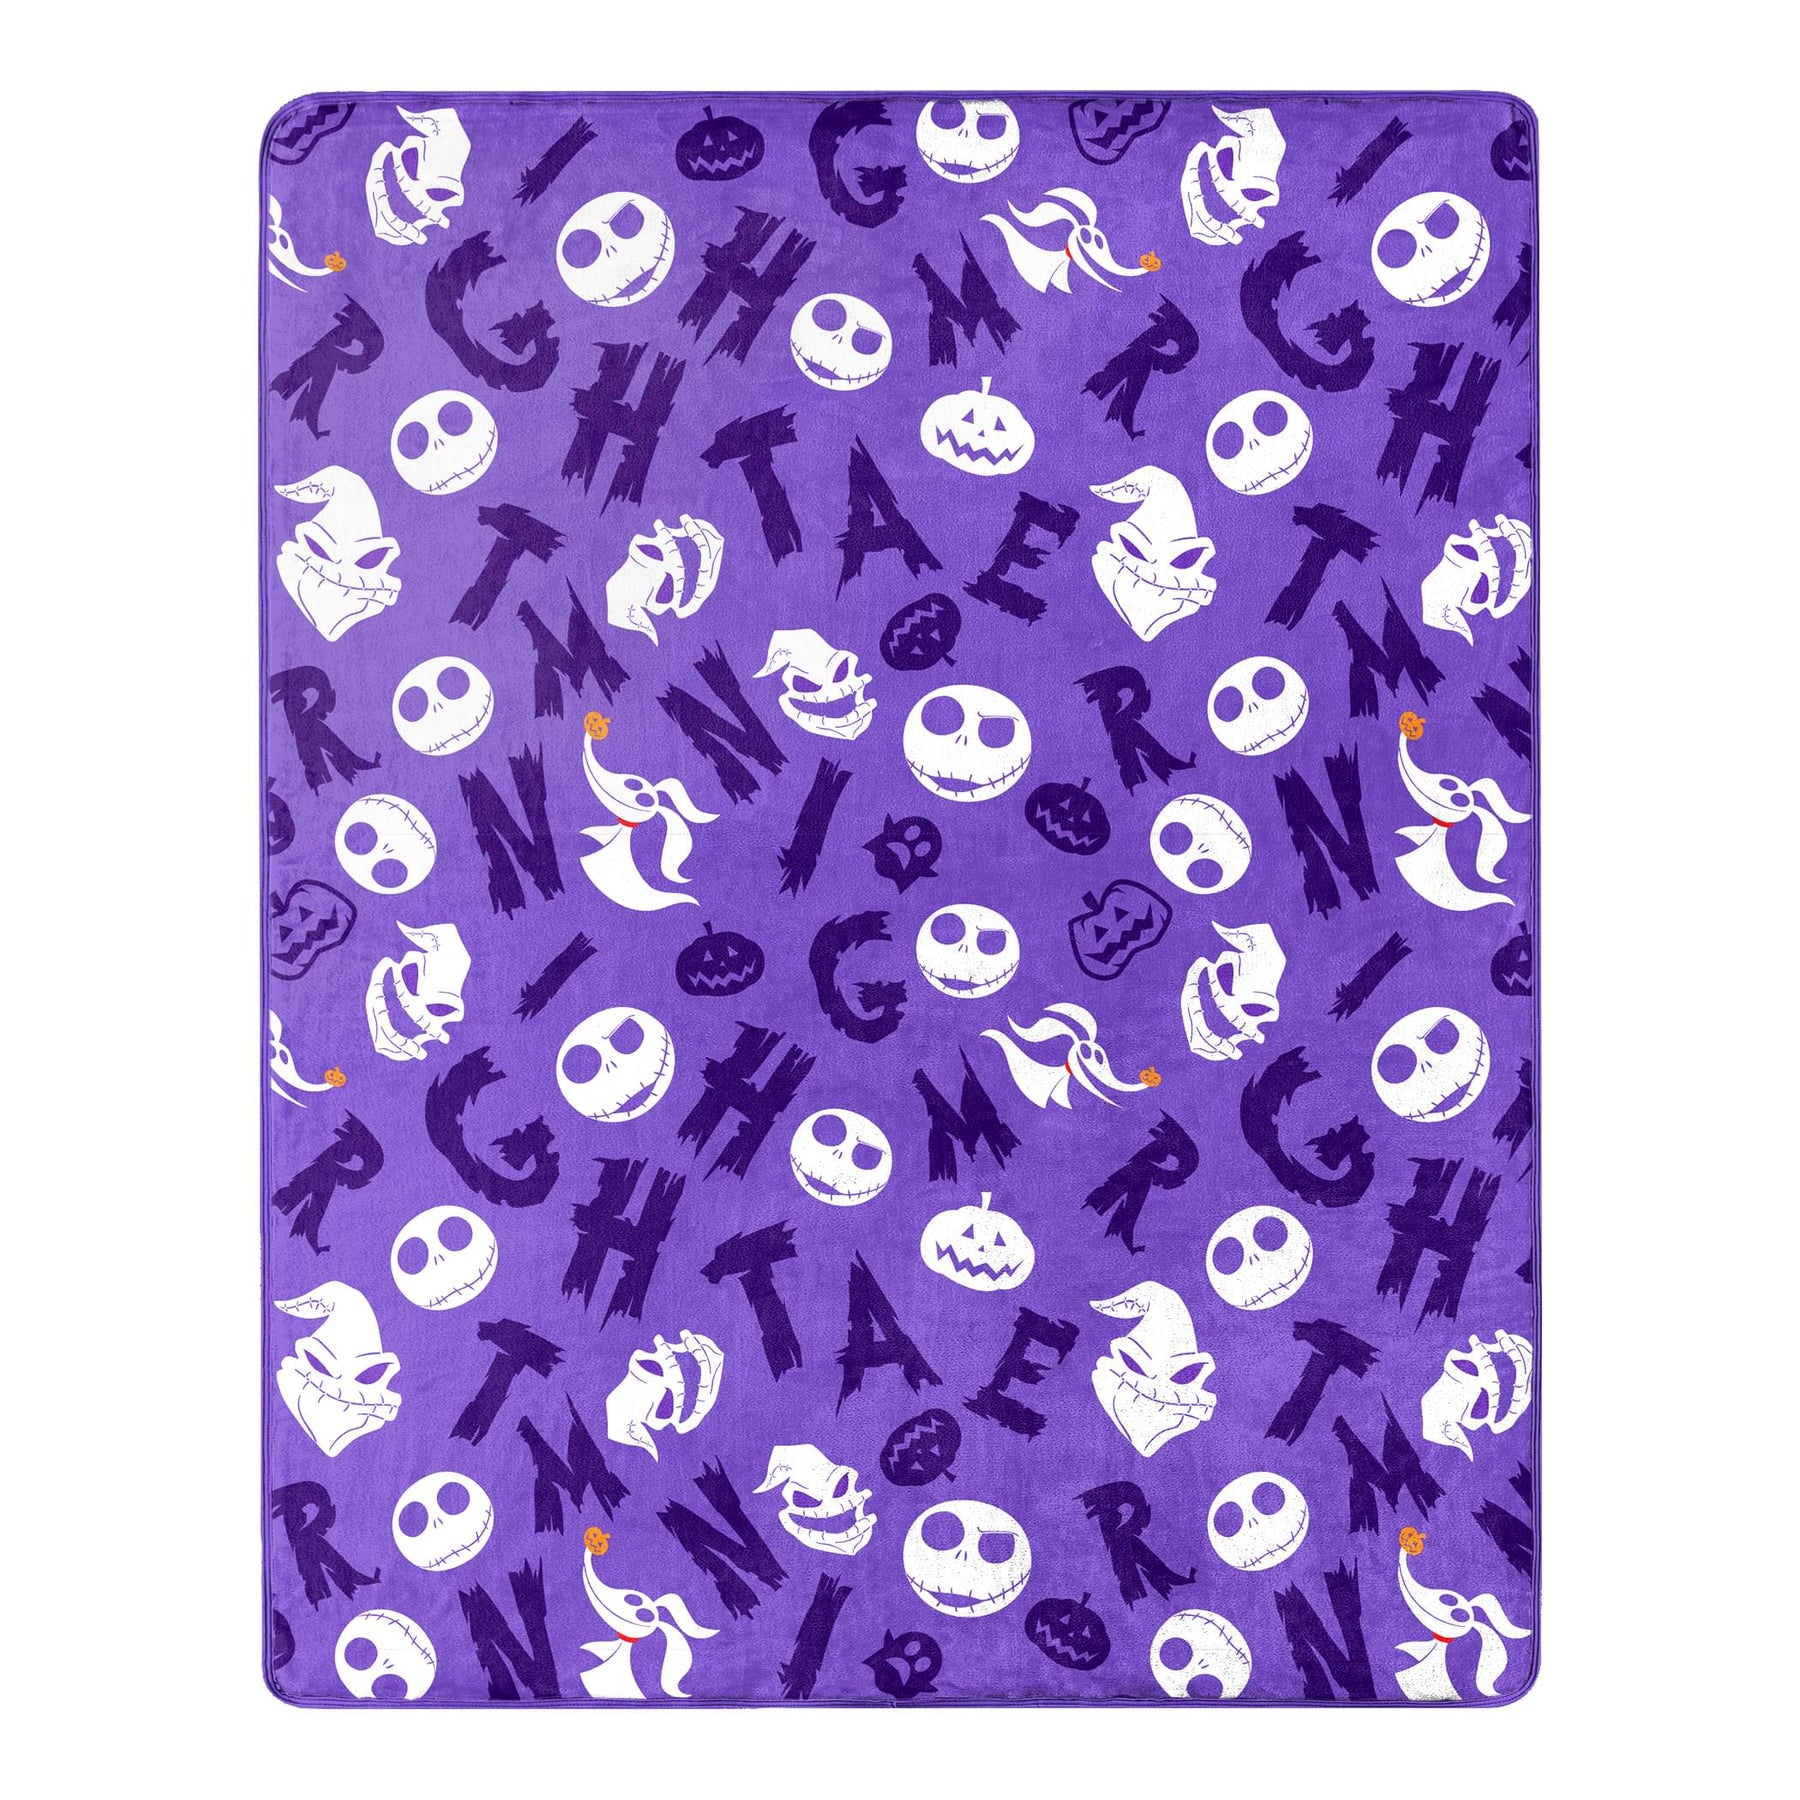 Nightmare Before Christmas Friends Silk Touch Throw Blanket & Plush Pillow